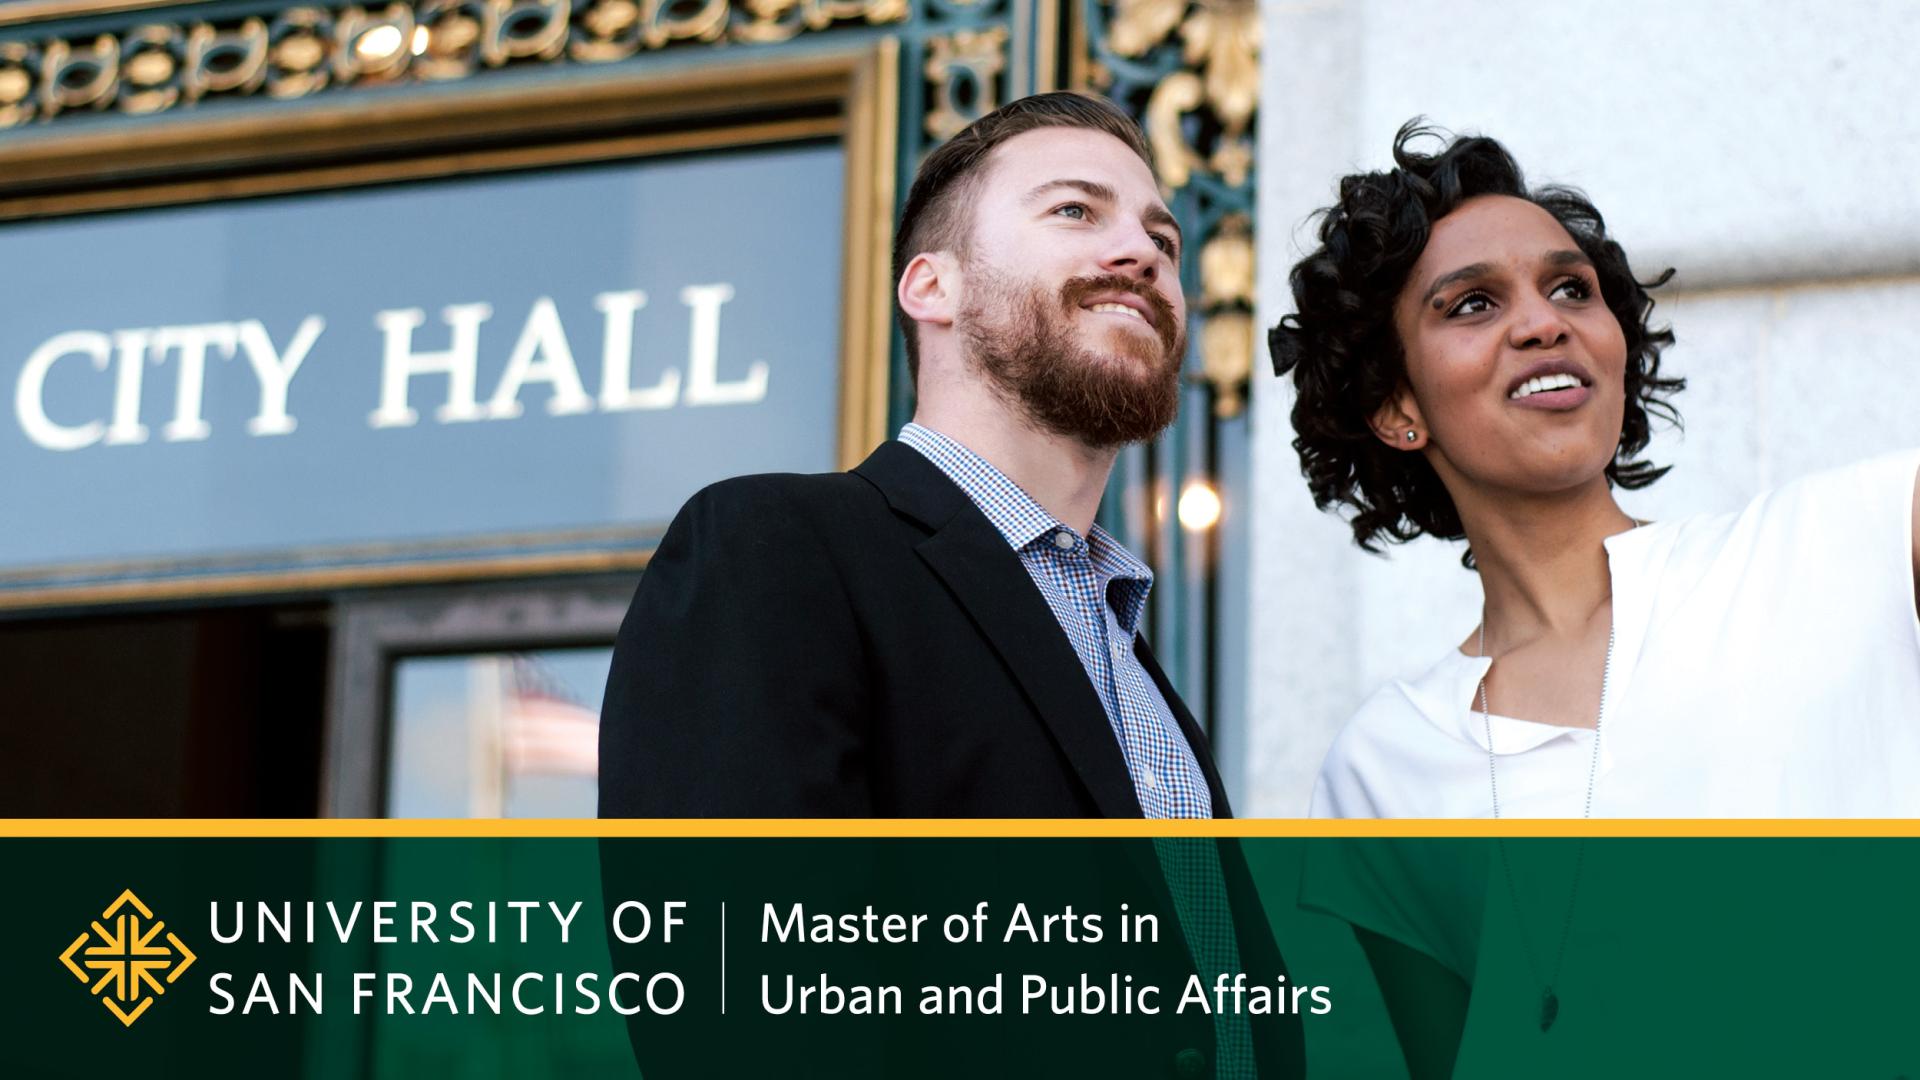 University of San Francisco Master of Arts in Urban and Public Affairs